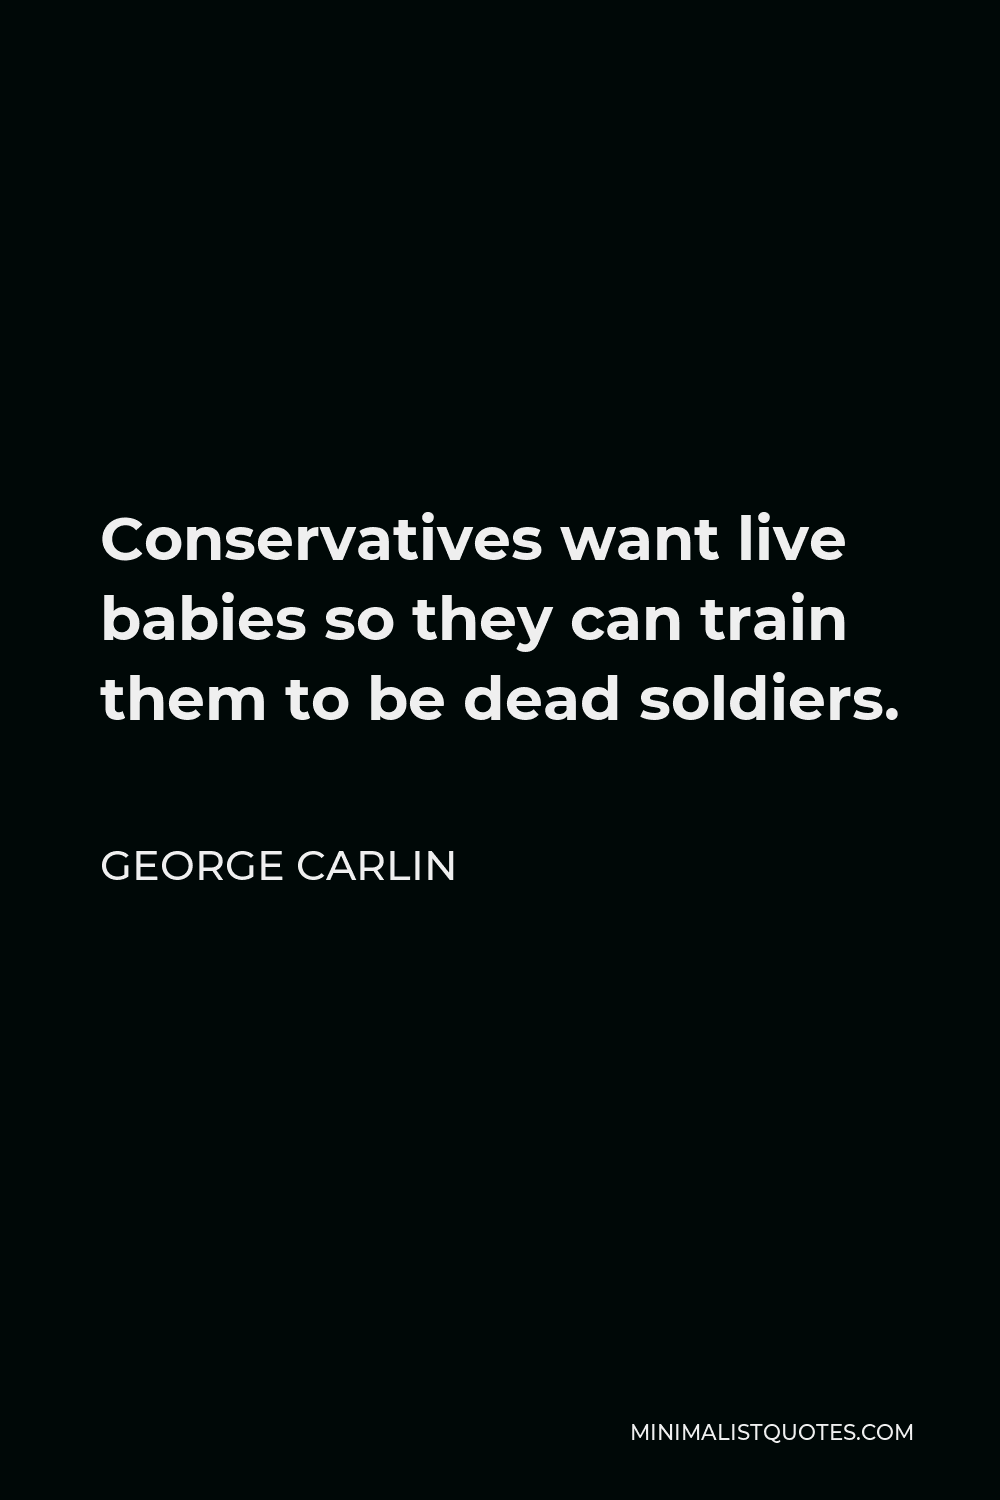 George Carlin Quote - Conservatives want live babies so they can train them to be dead soldiers.